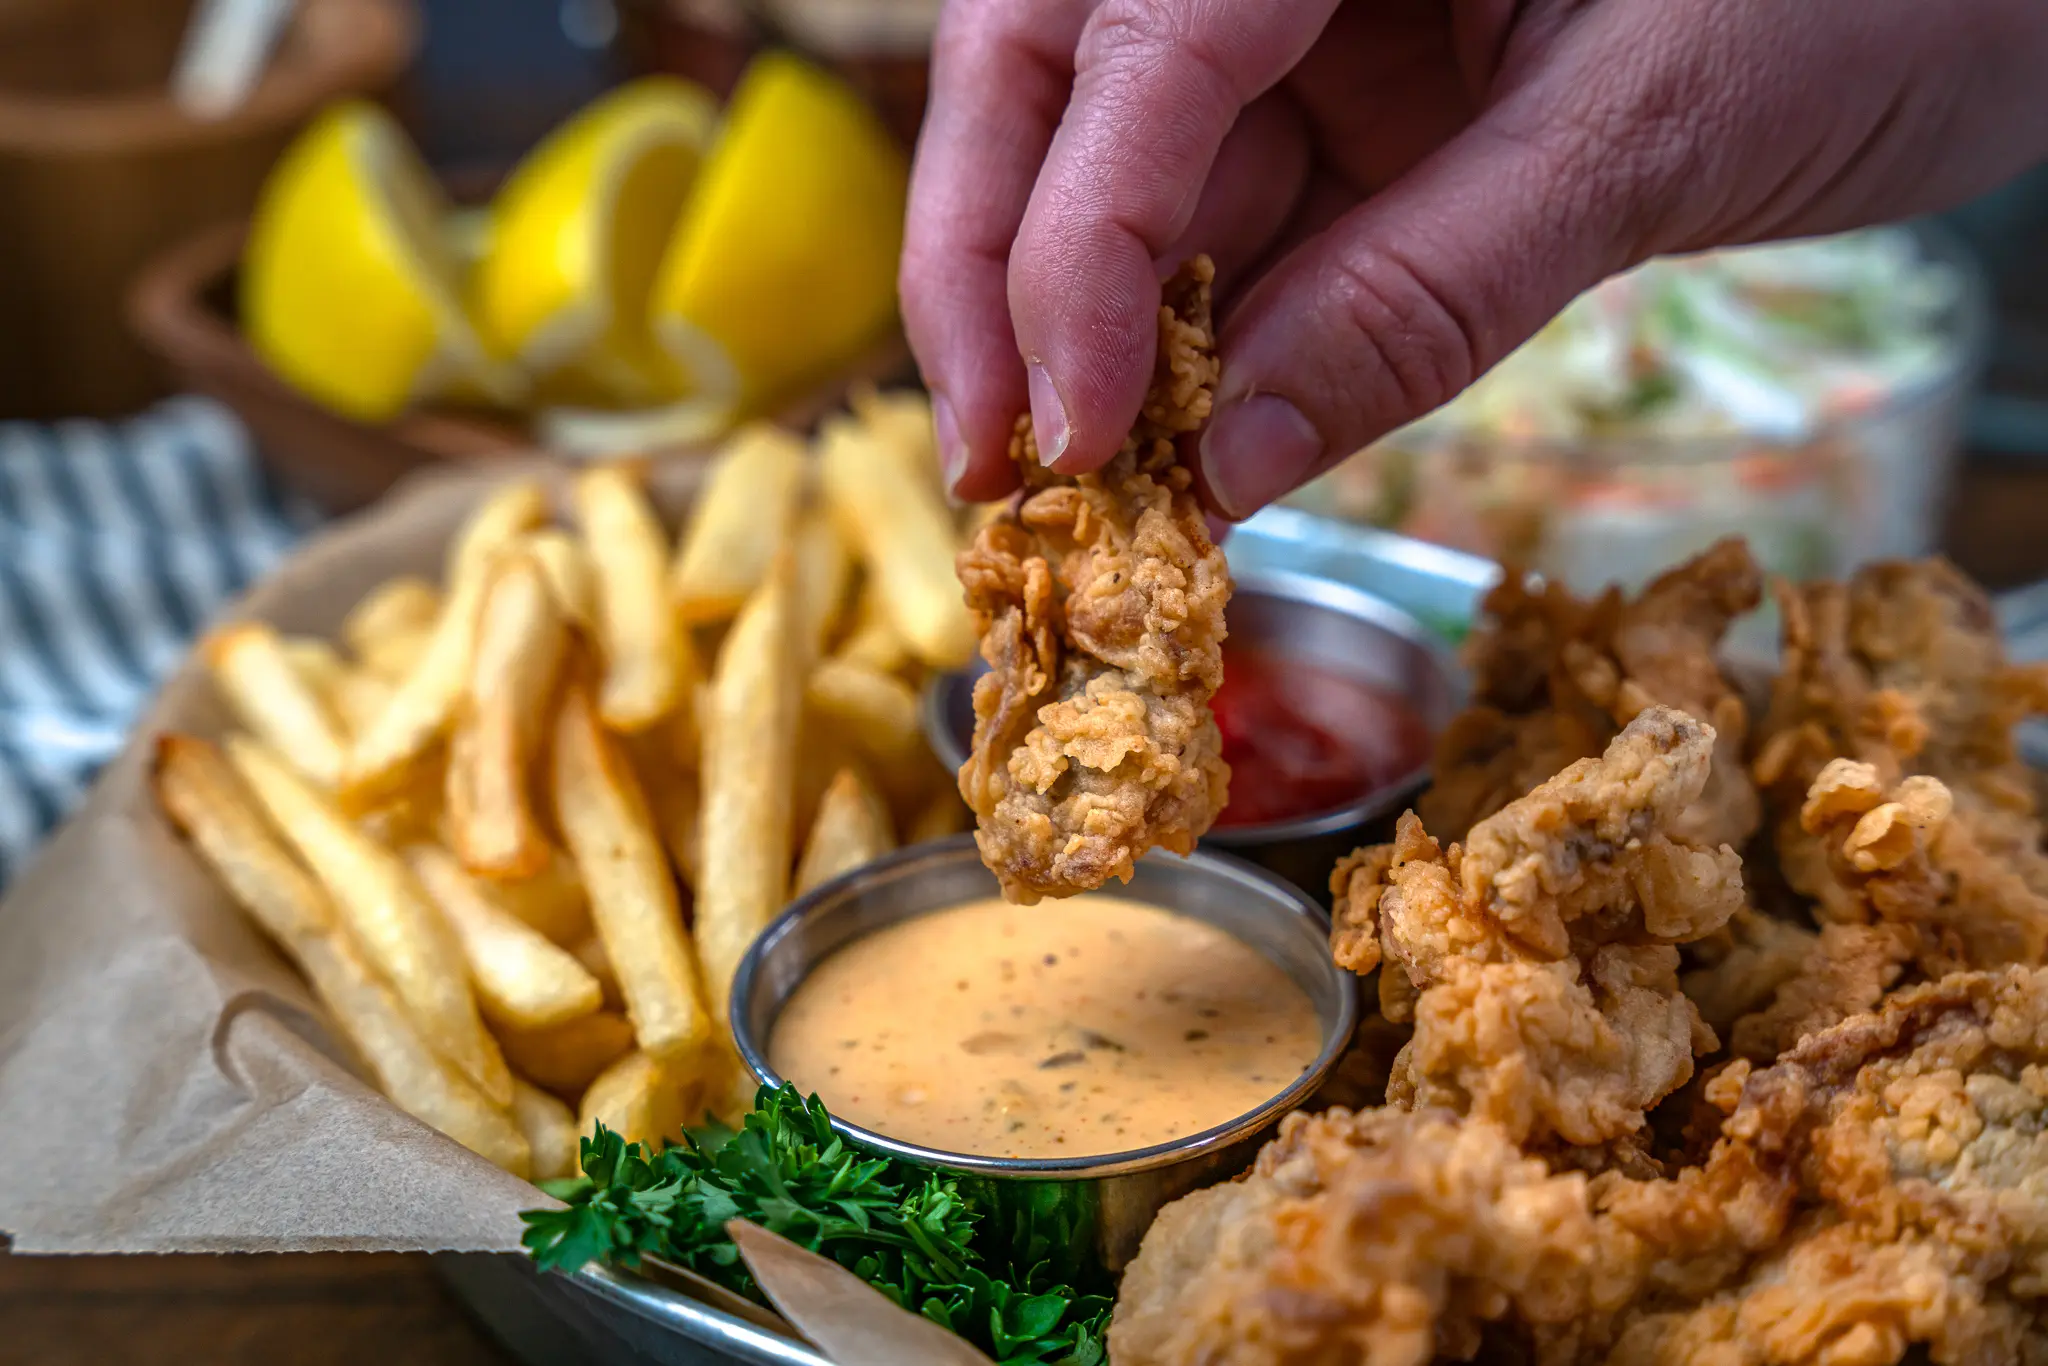 dipping a crispy fried oyster in remoulade dipping sauce